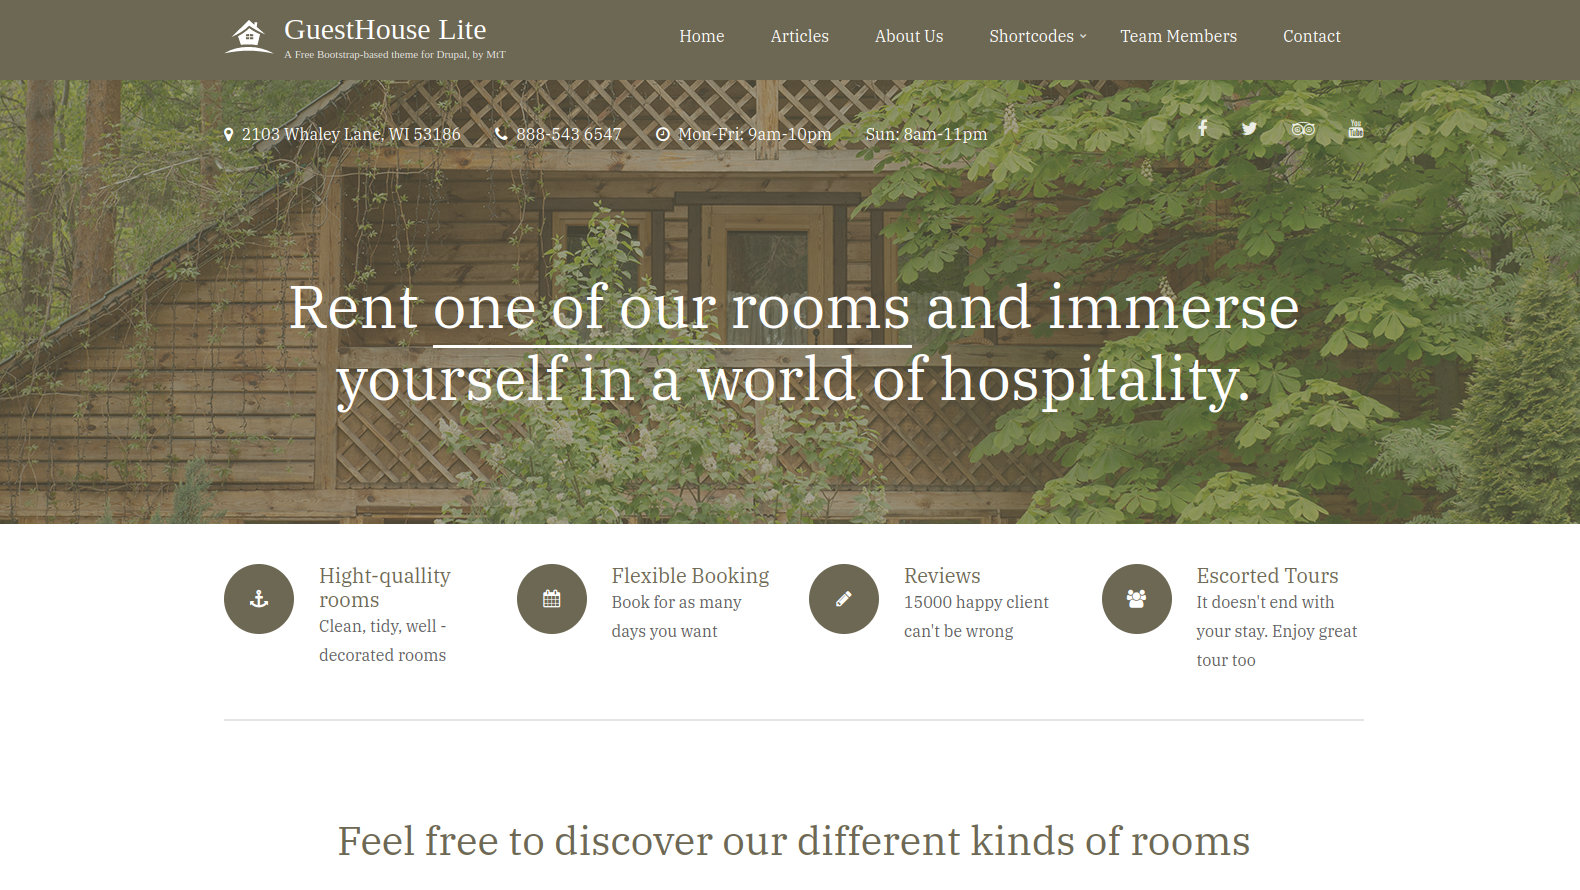 Guesthouse Lite: A free Drupal 9 theme for hotels and guesthouses